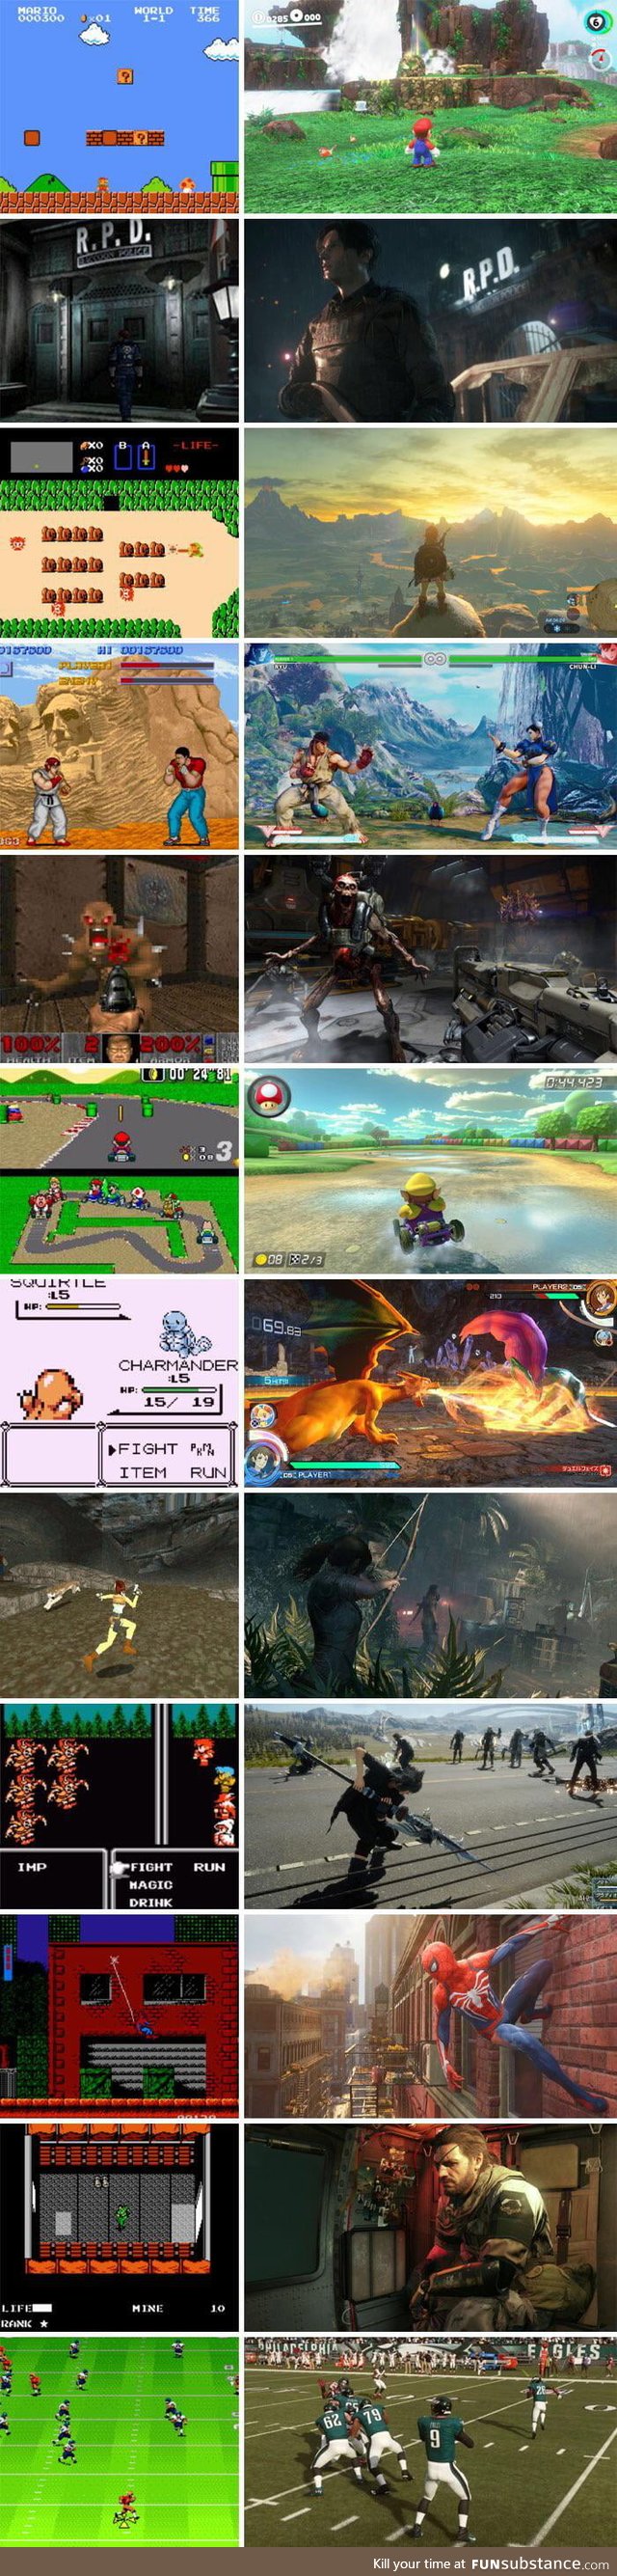 Video game graphics have come a long way